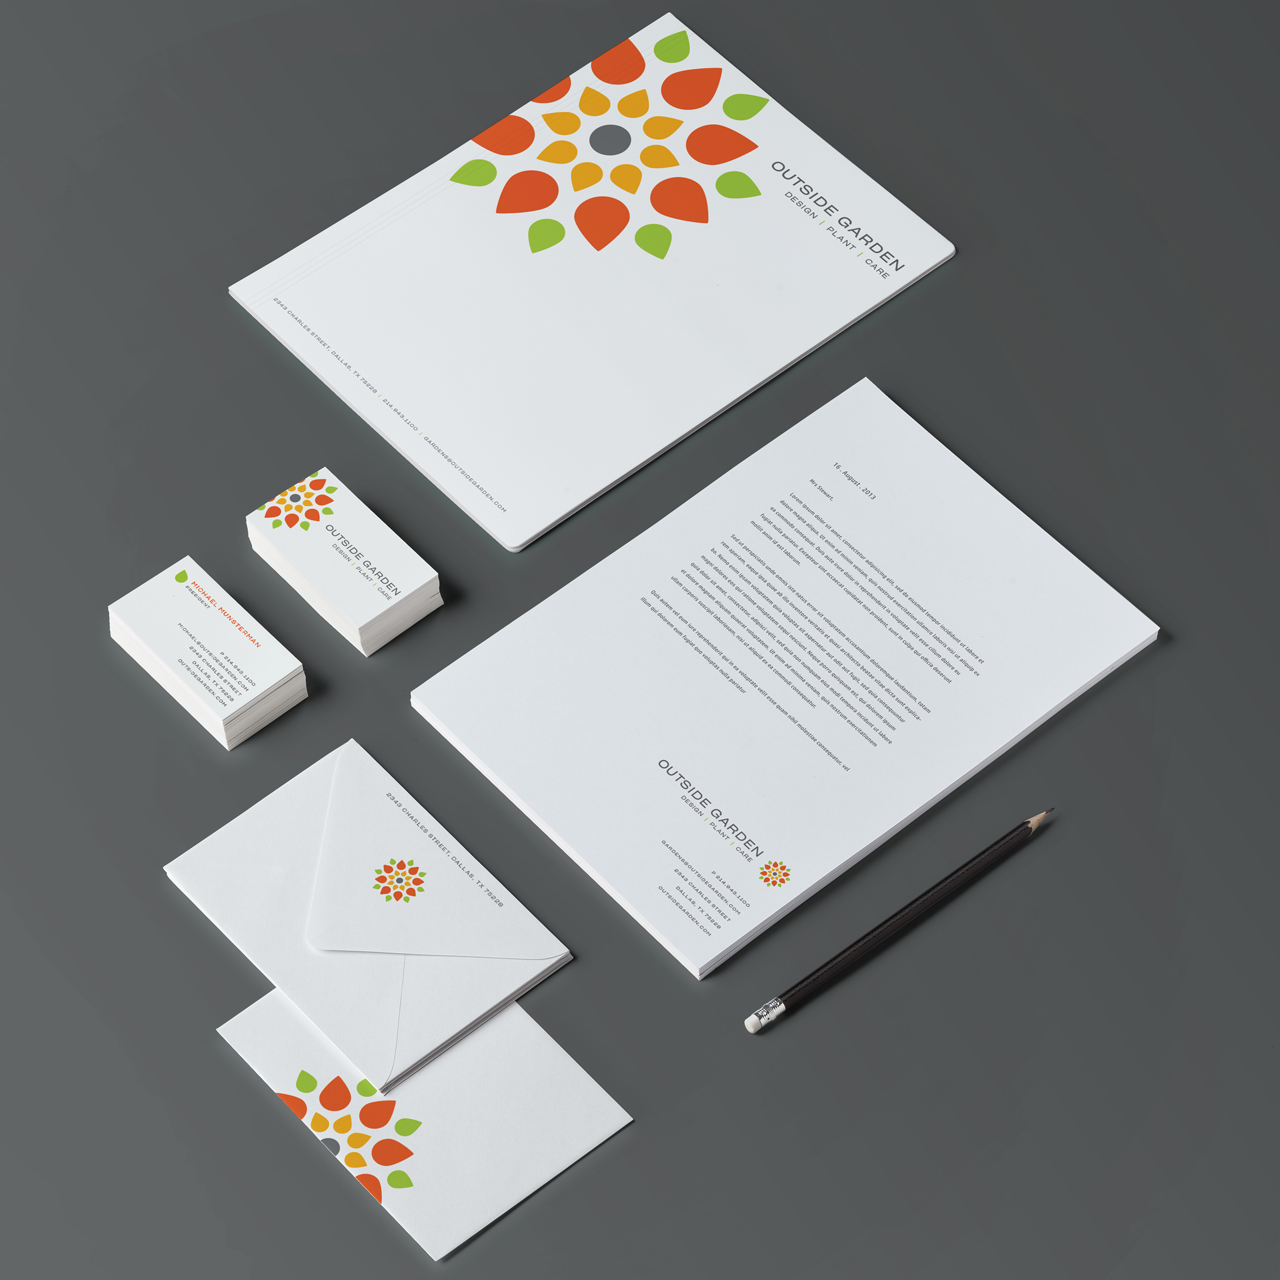 An image of stationery design for Outside Garden